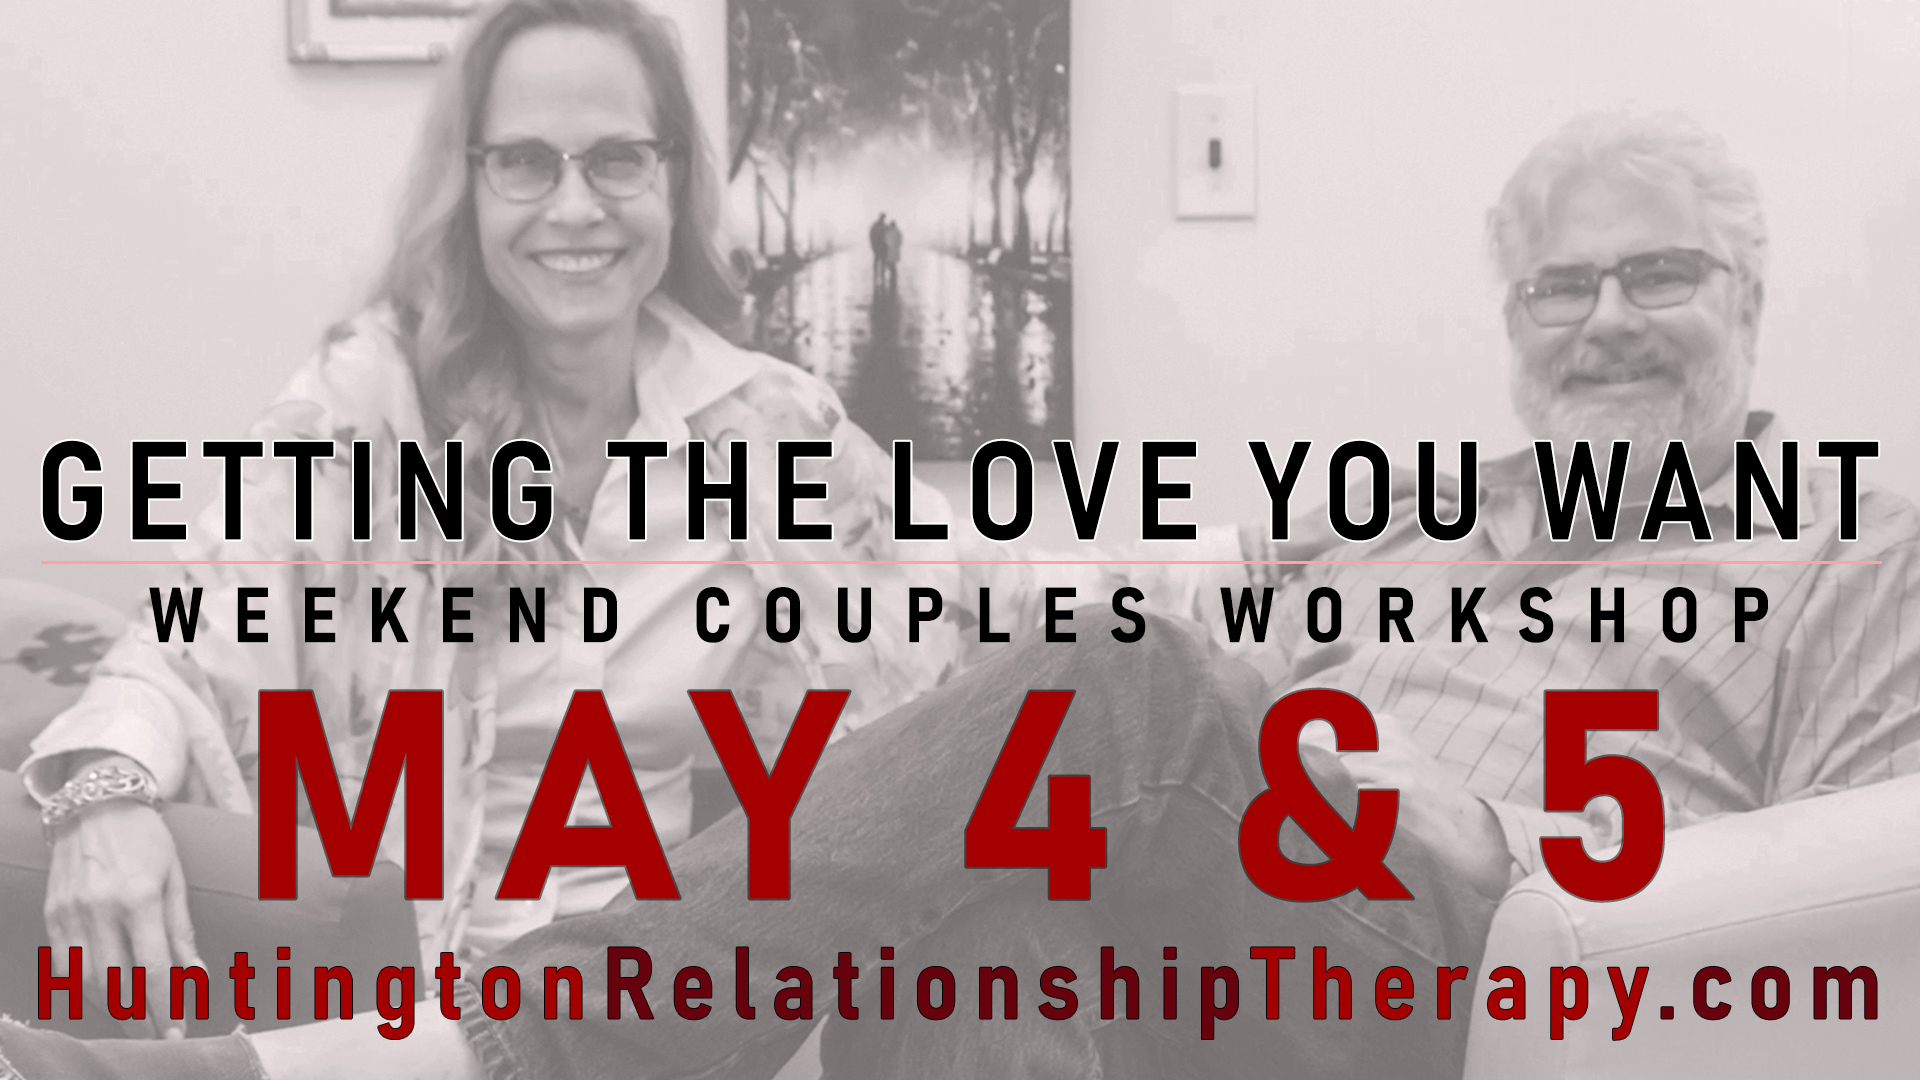 Long Island Couples Workshop May 4 & 5, 2019